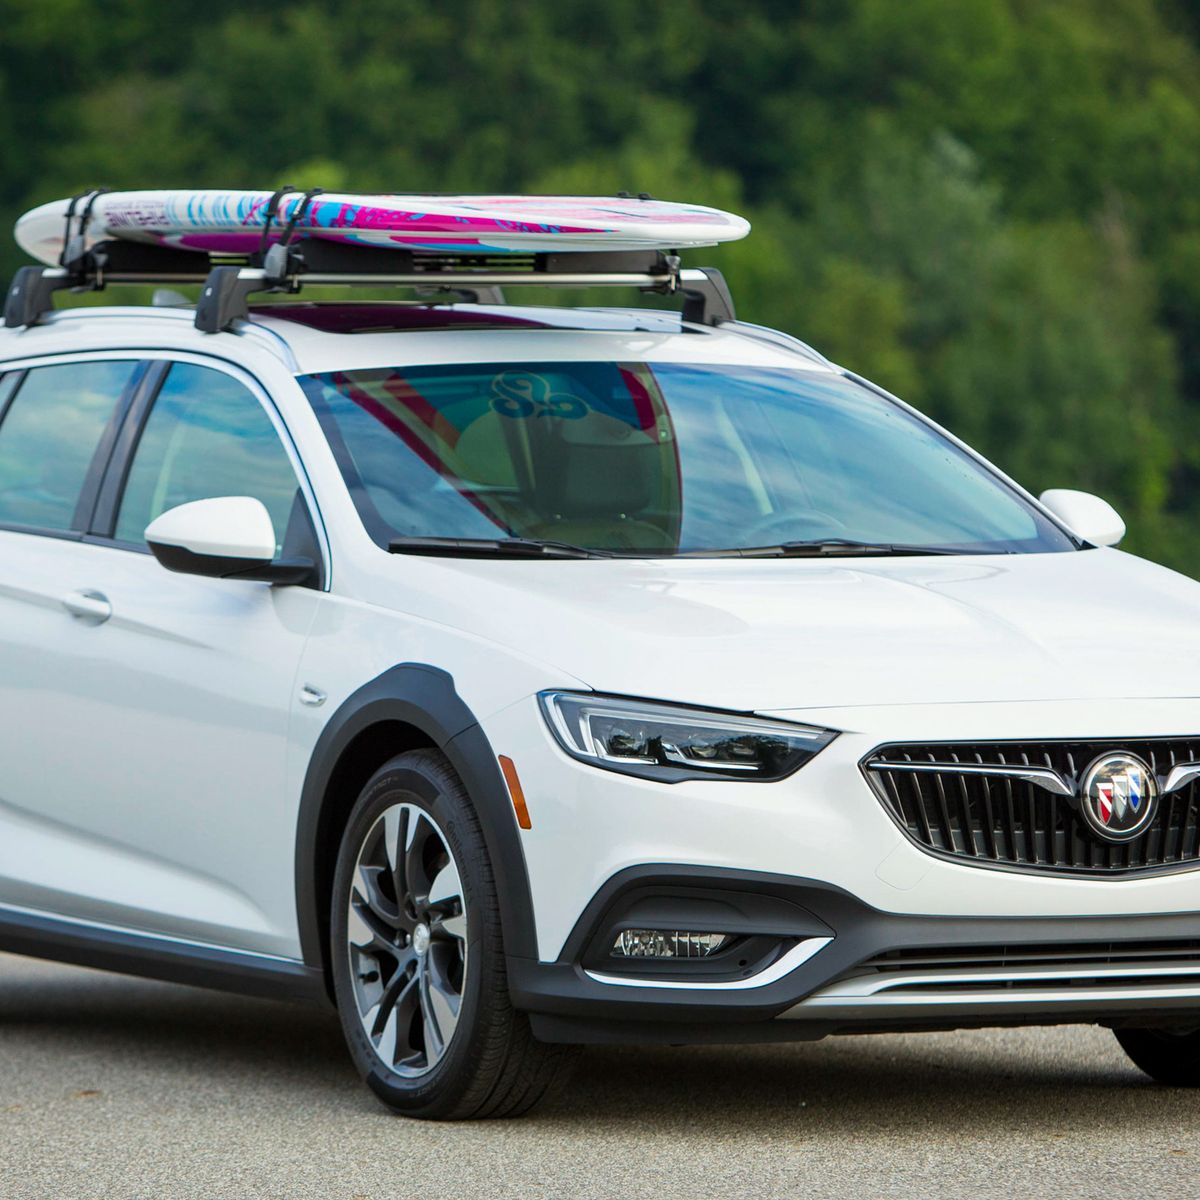 We Drive the 2018 Buick Regal Sportback, TourX, and GS